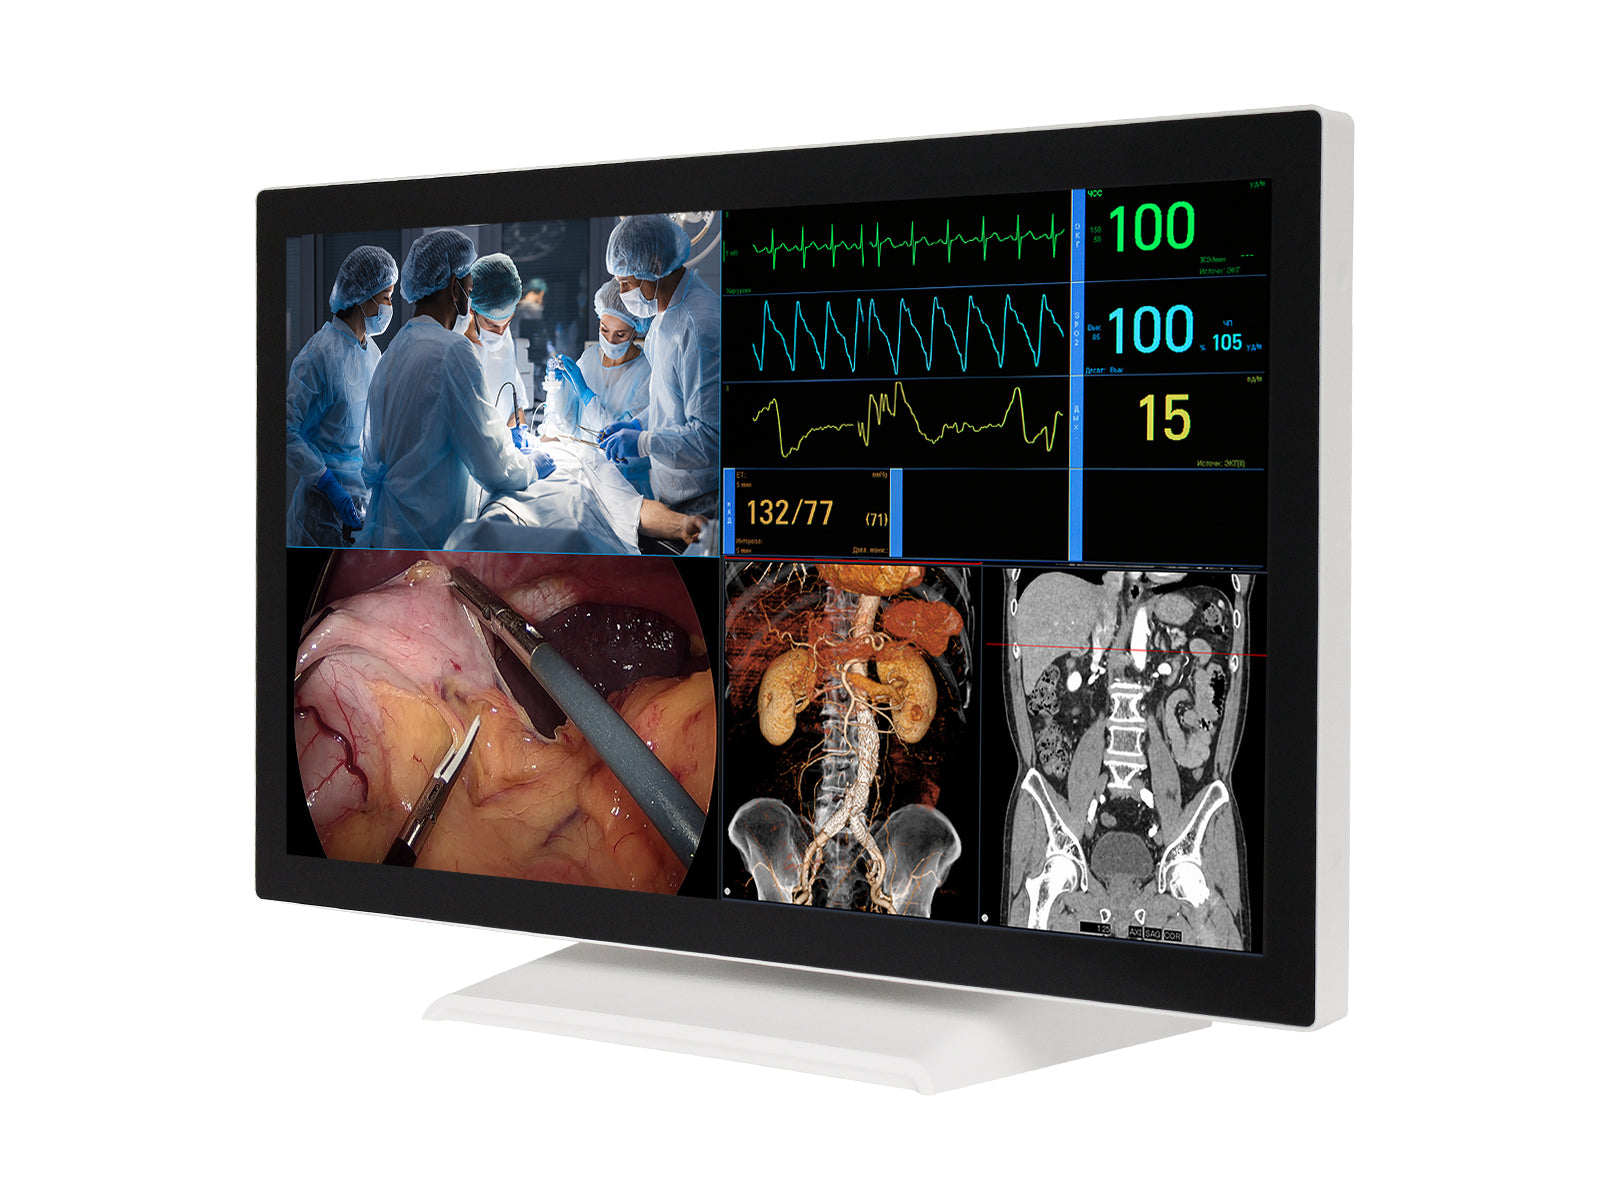 Barco AMM 215WTTP 21.5” Full HD Touchscreen Color Clinical Review Display Monitor (215ETTWZA)